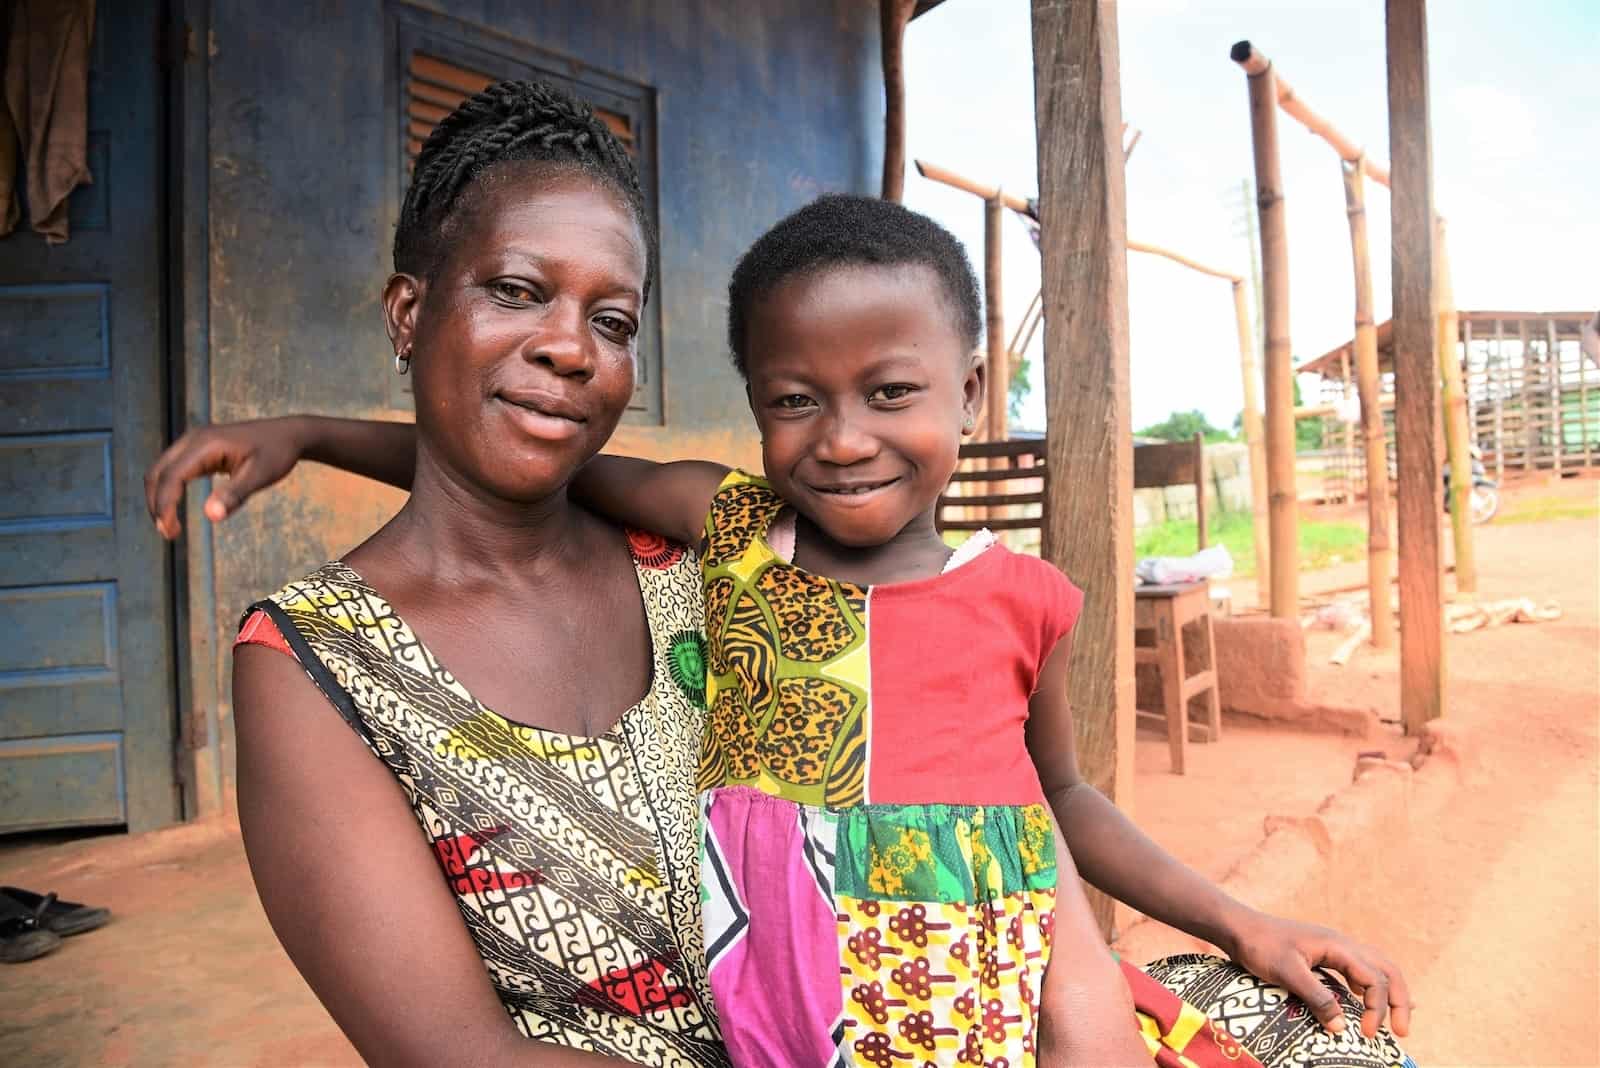 A woman who kept her daughter inside due to a Ghana superstition wears a green and red dress, holding a young girl in her arms in front of a blue house. 